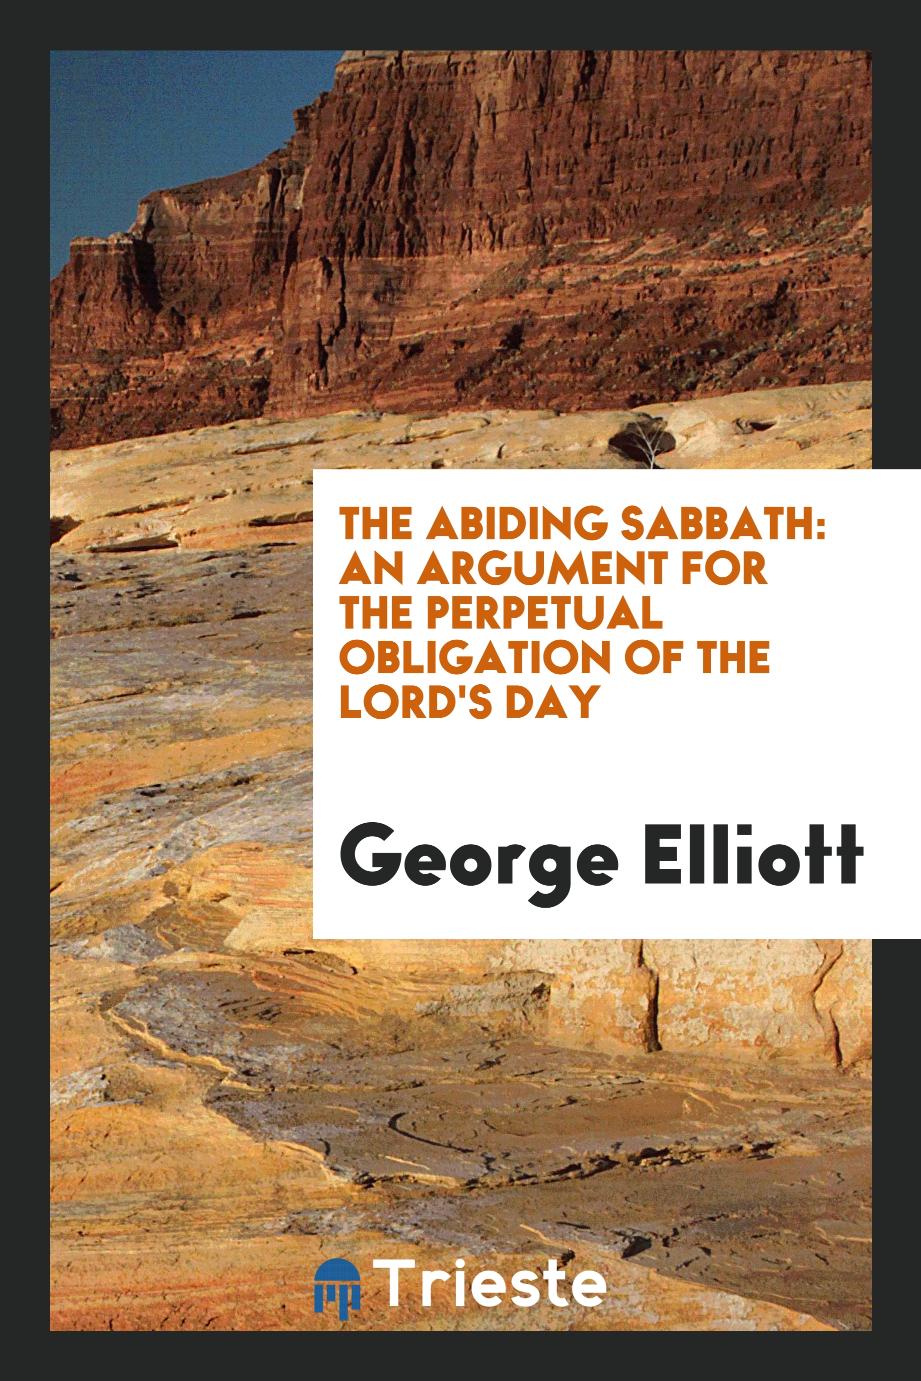 The abiding Sabbath: an argument for the perpetual obligation of the Lord's day